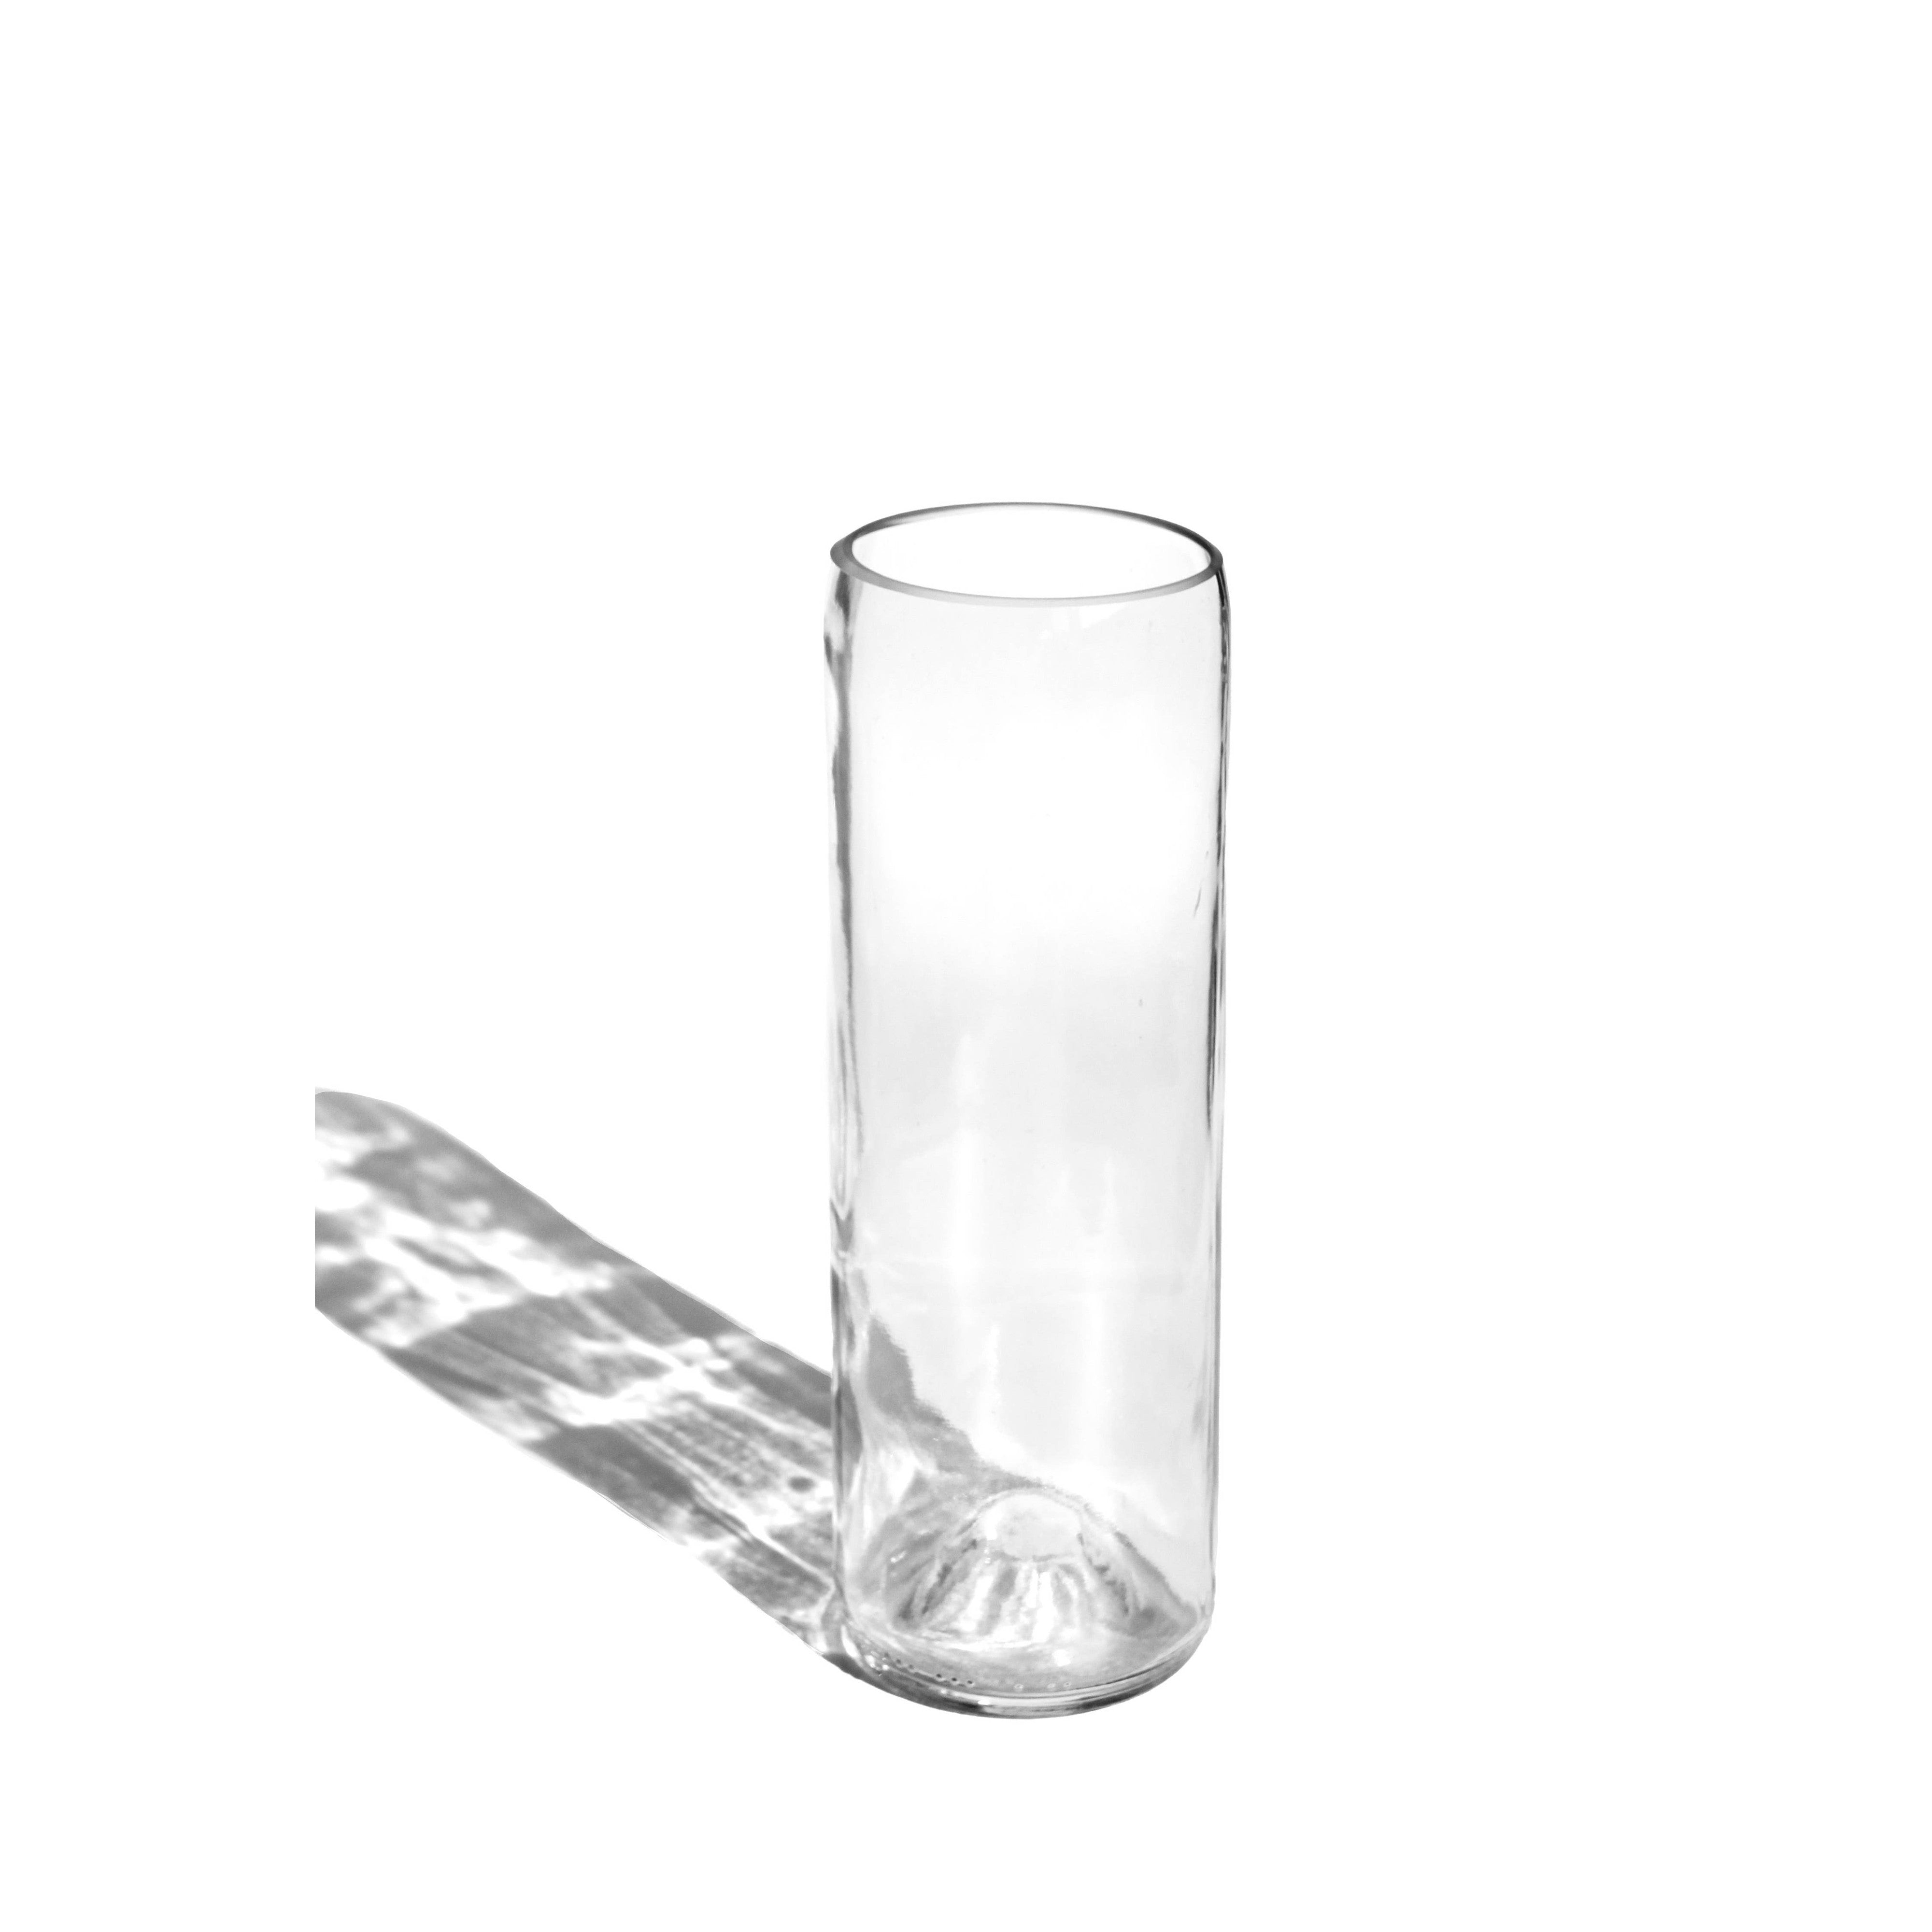 Vase Plain Eco - Upcycled Hand-Crafted: Clear